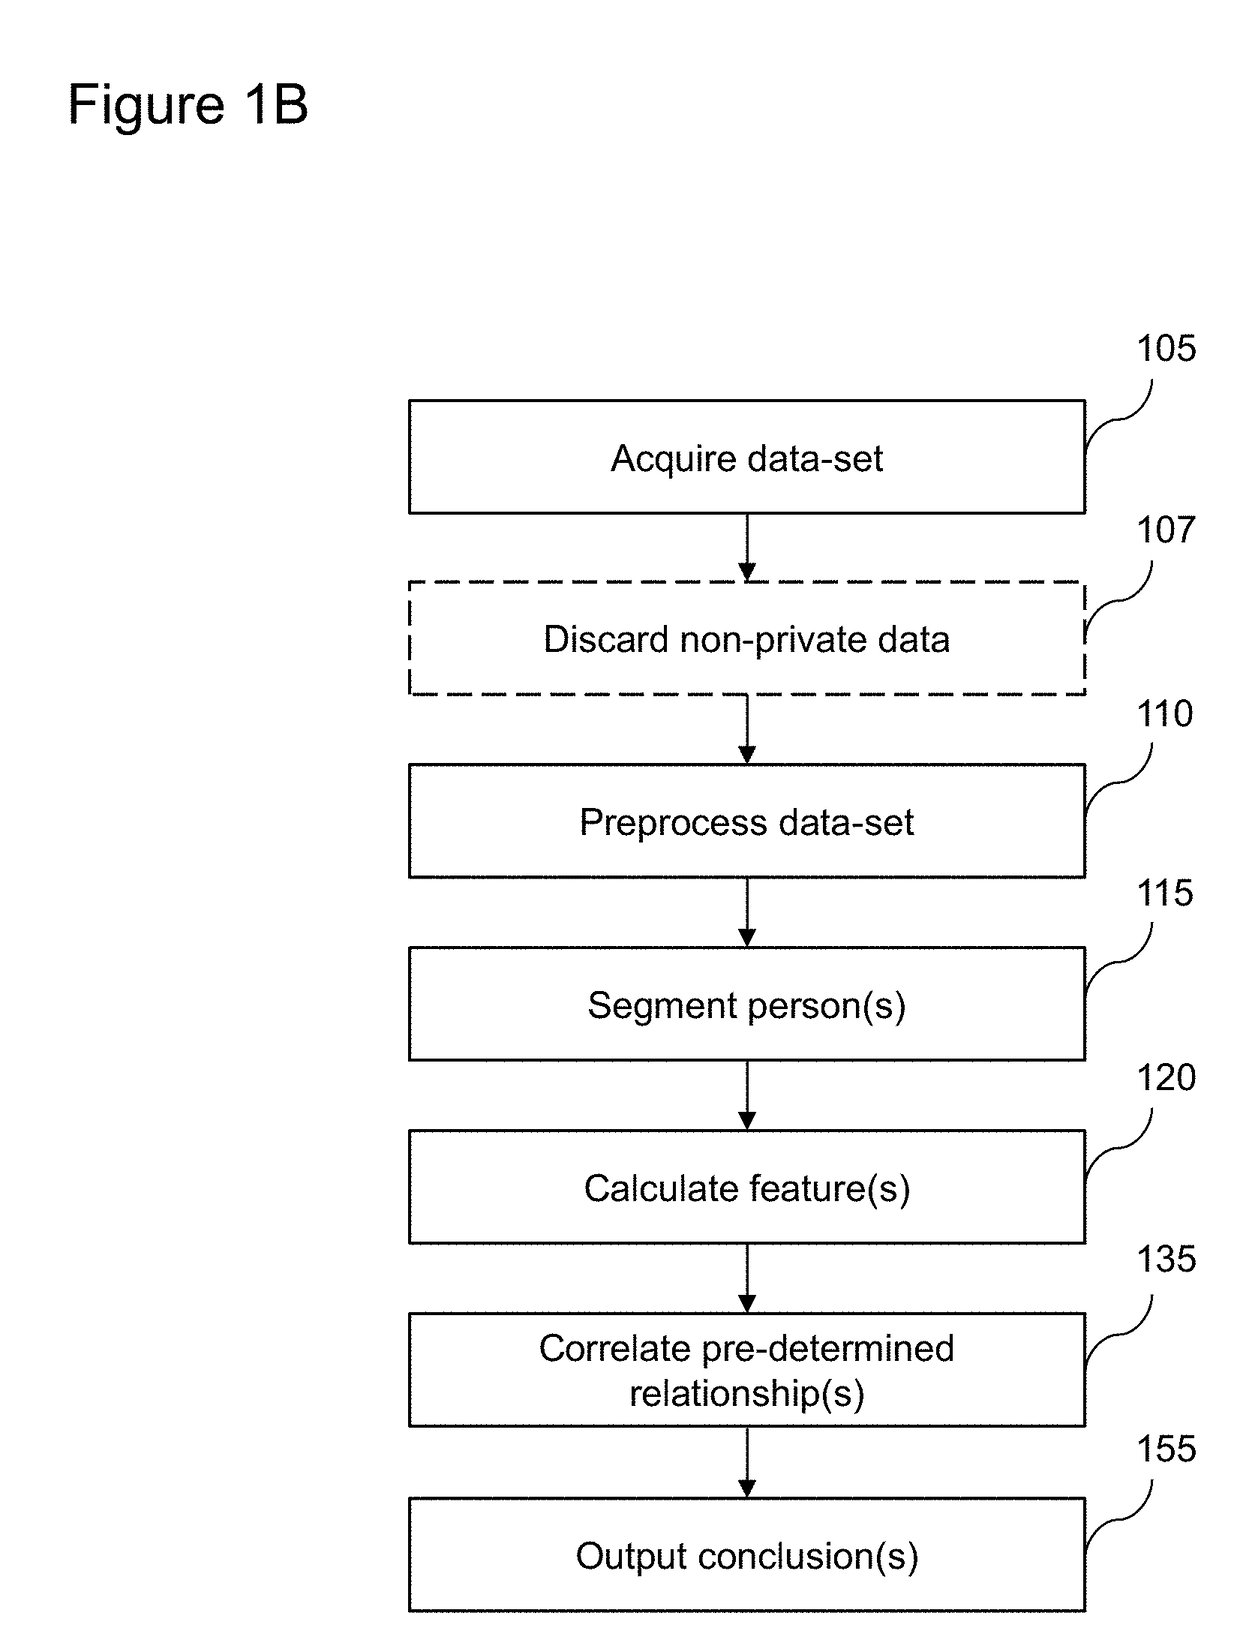 Systems and methods to identify persons and/or identify and quantify pain, fatigue, mood, and intent with protection of privacy